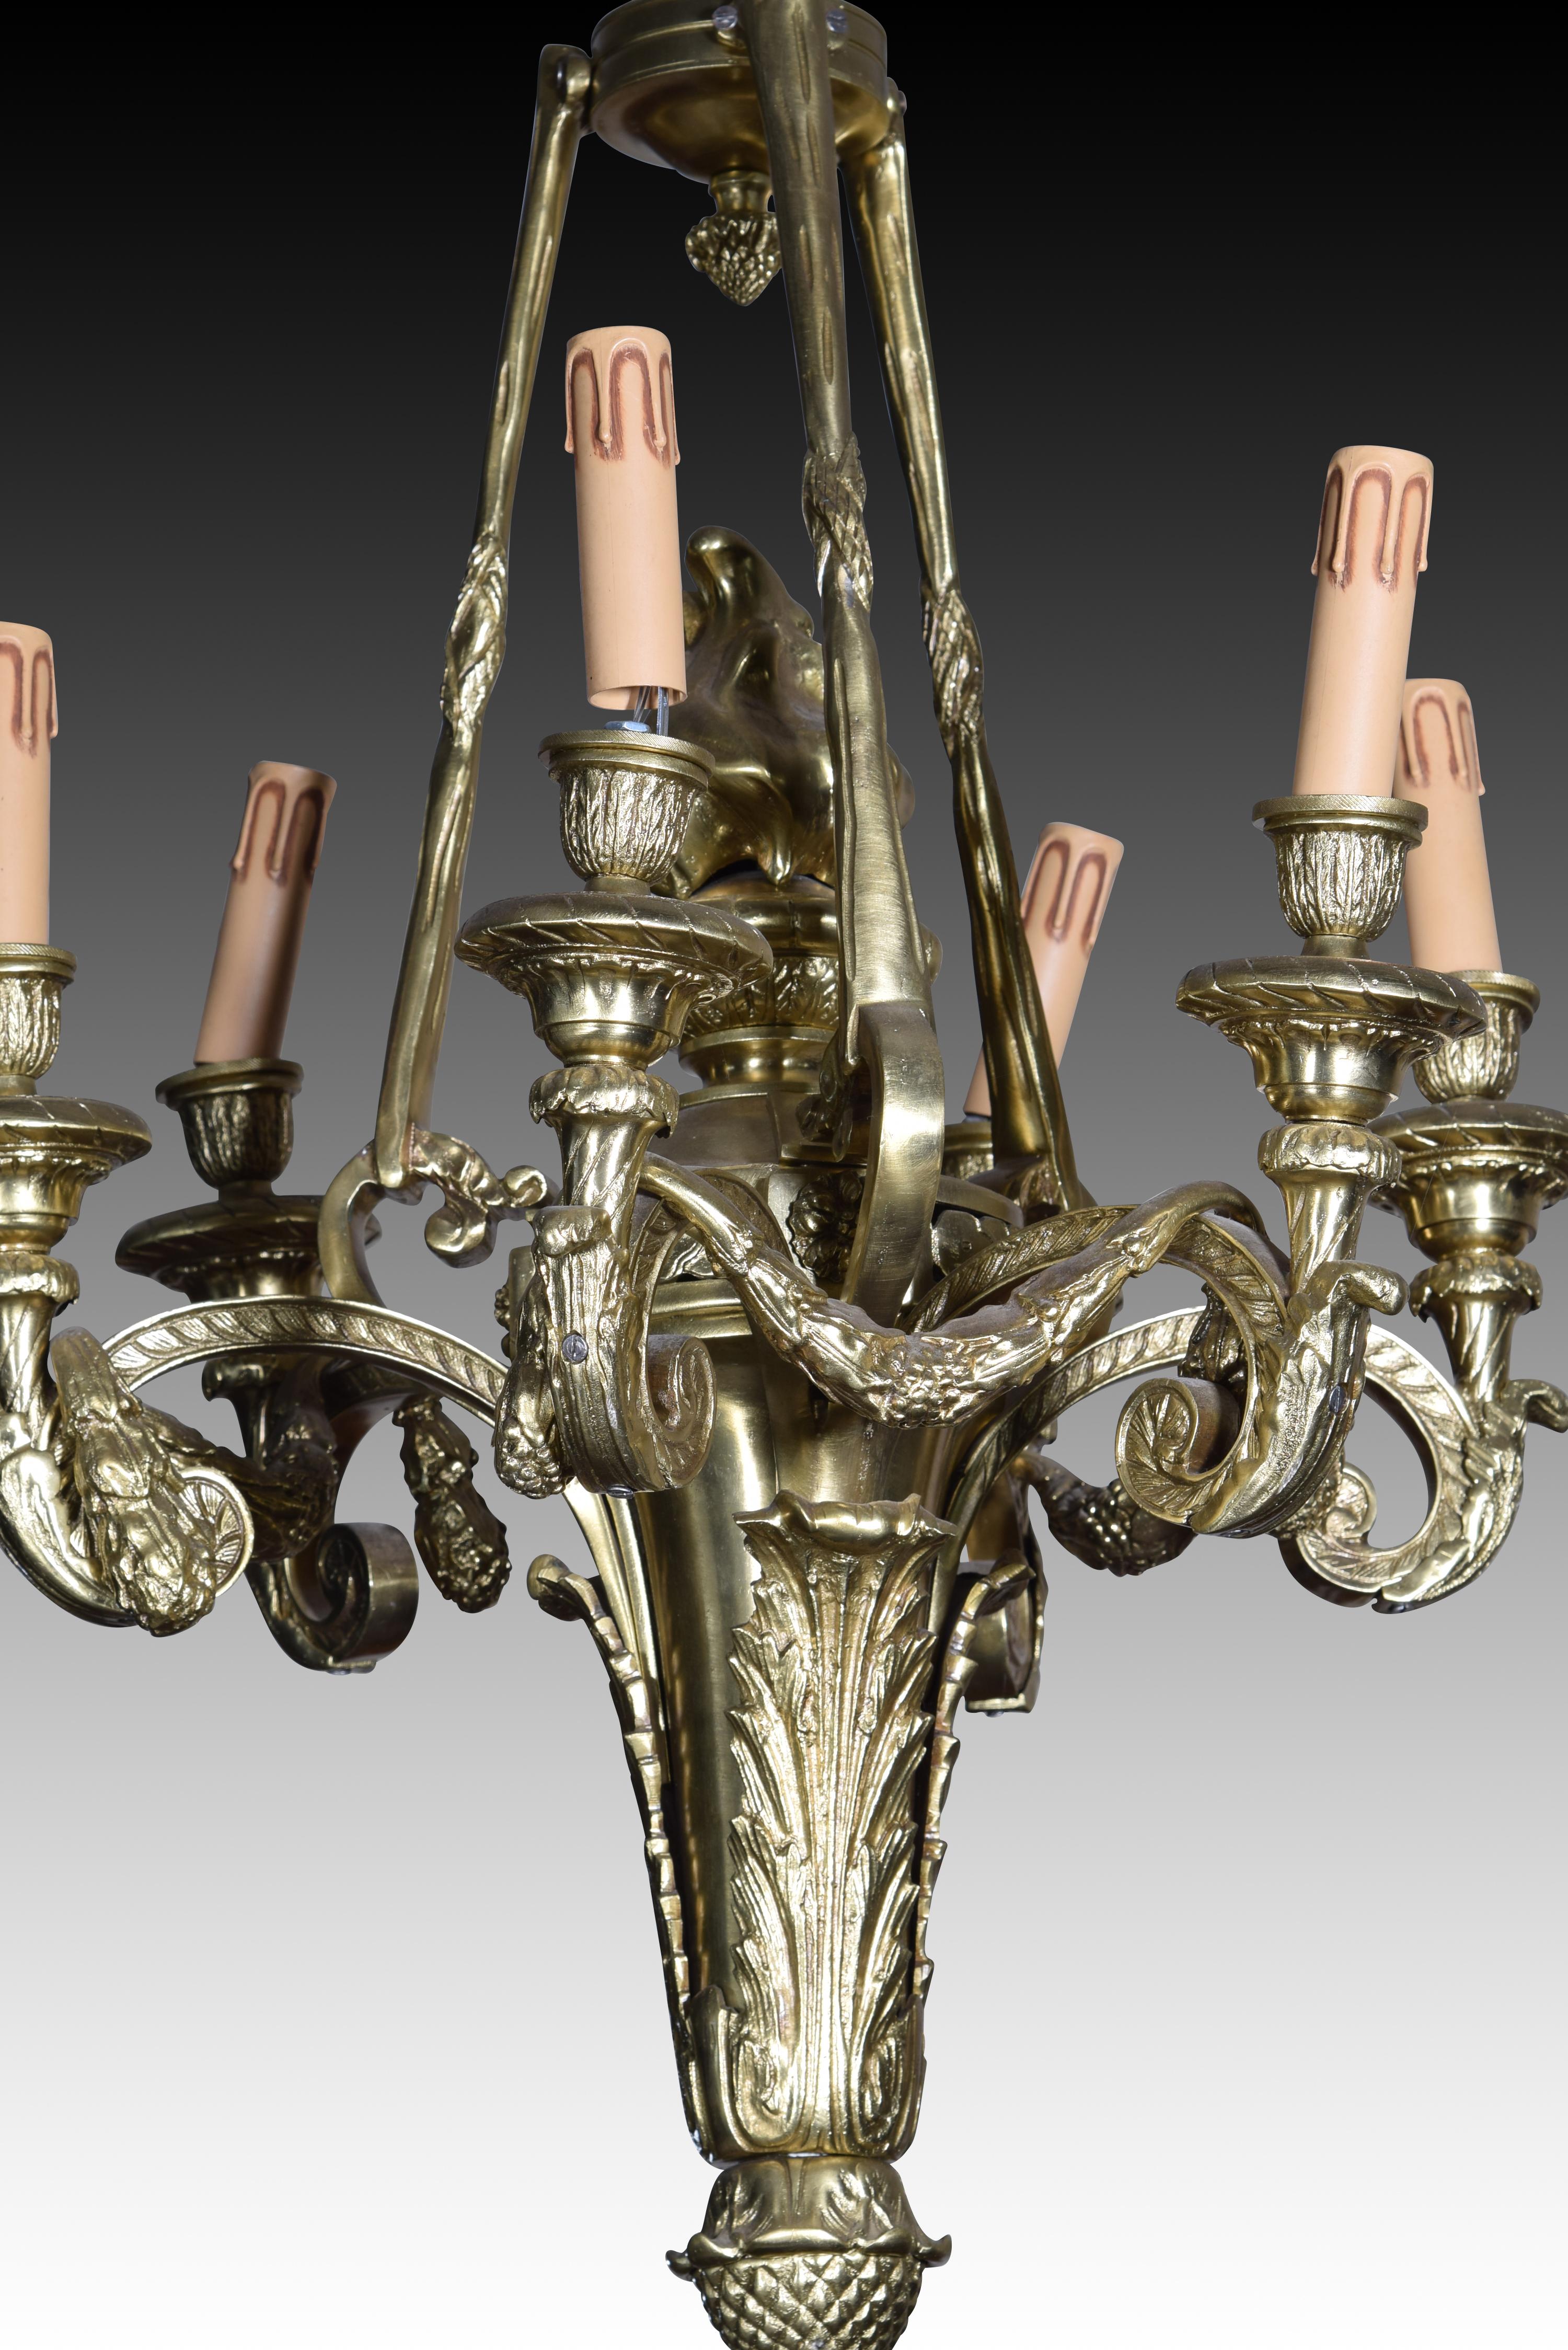 Ceiling light. Bronze. 
Six-light ceiling lamp with curved arms decorated with architectural and plant elements that start from a torch, attached to the ceiling piece by chains. Both in the decorative elements and in the shape you can see a direct